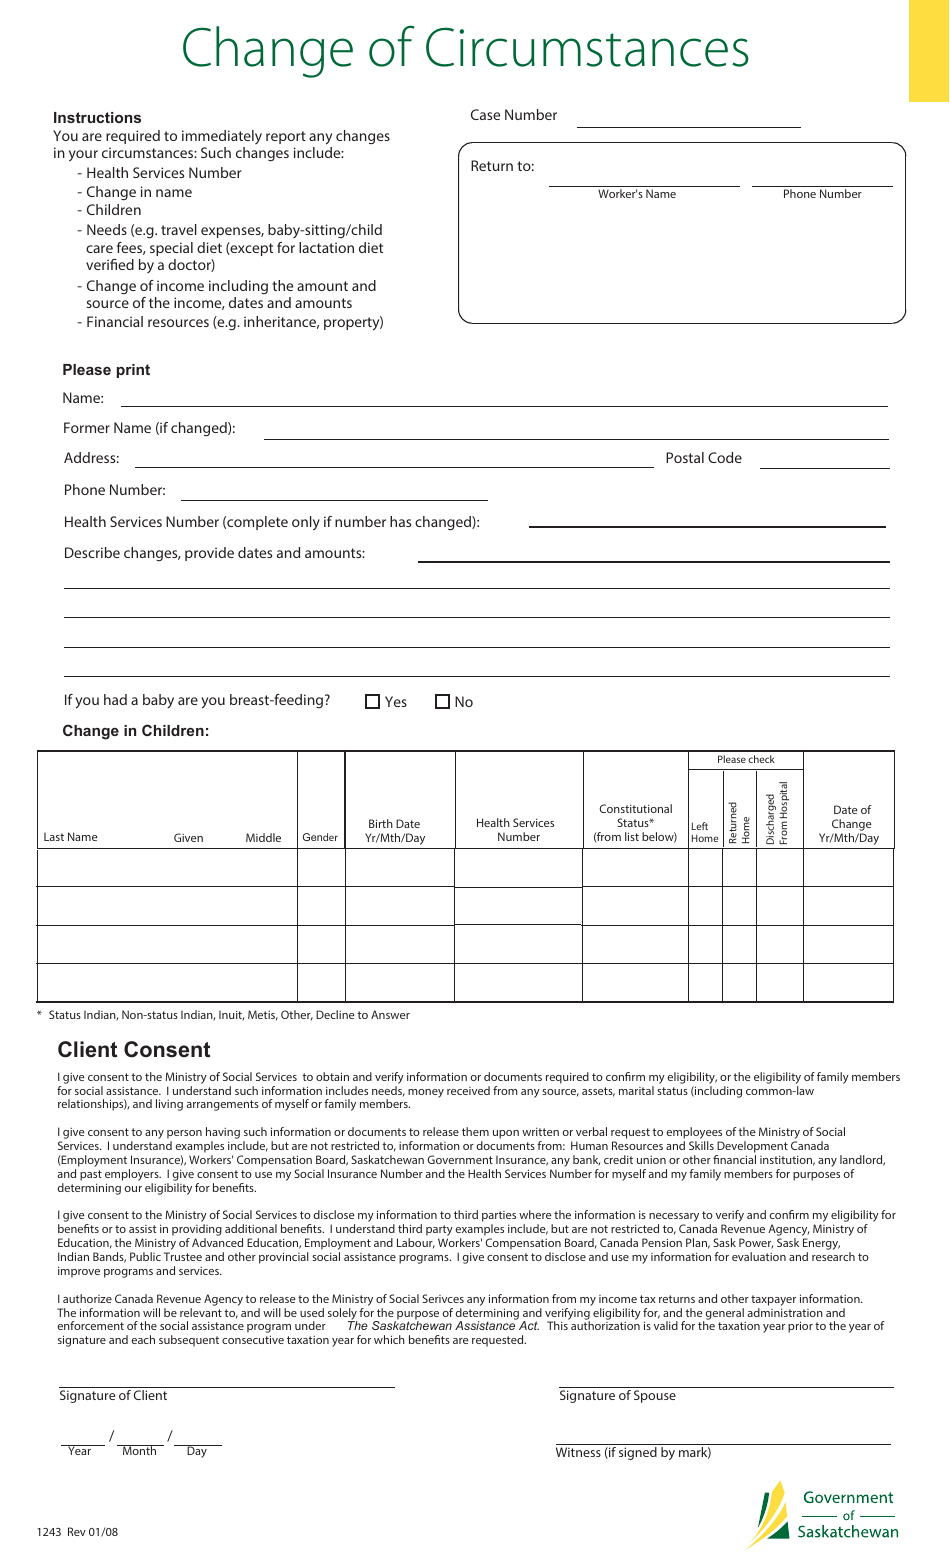 Form 1243 Download Fillable PDF Or Fill Online Change Of Circumstances 